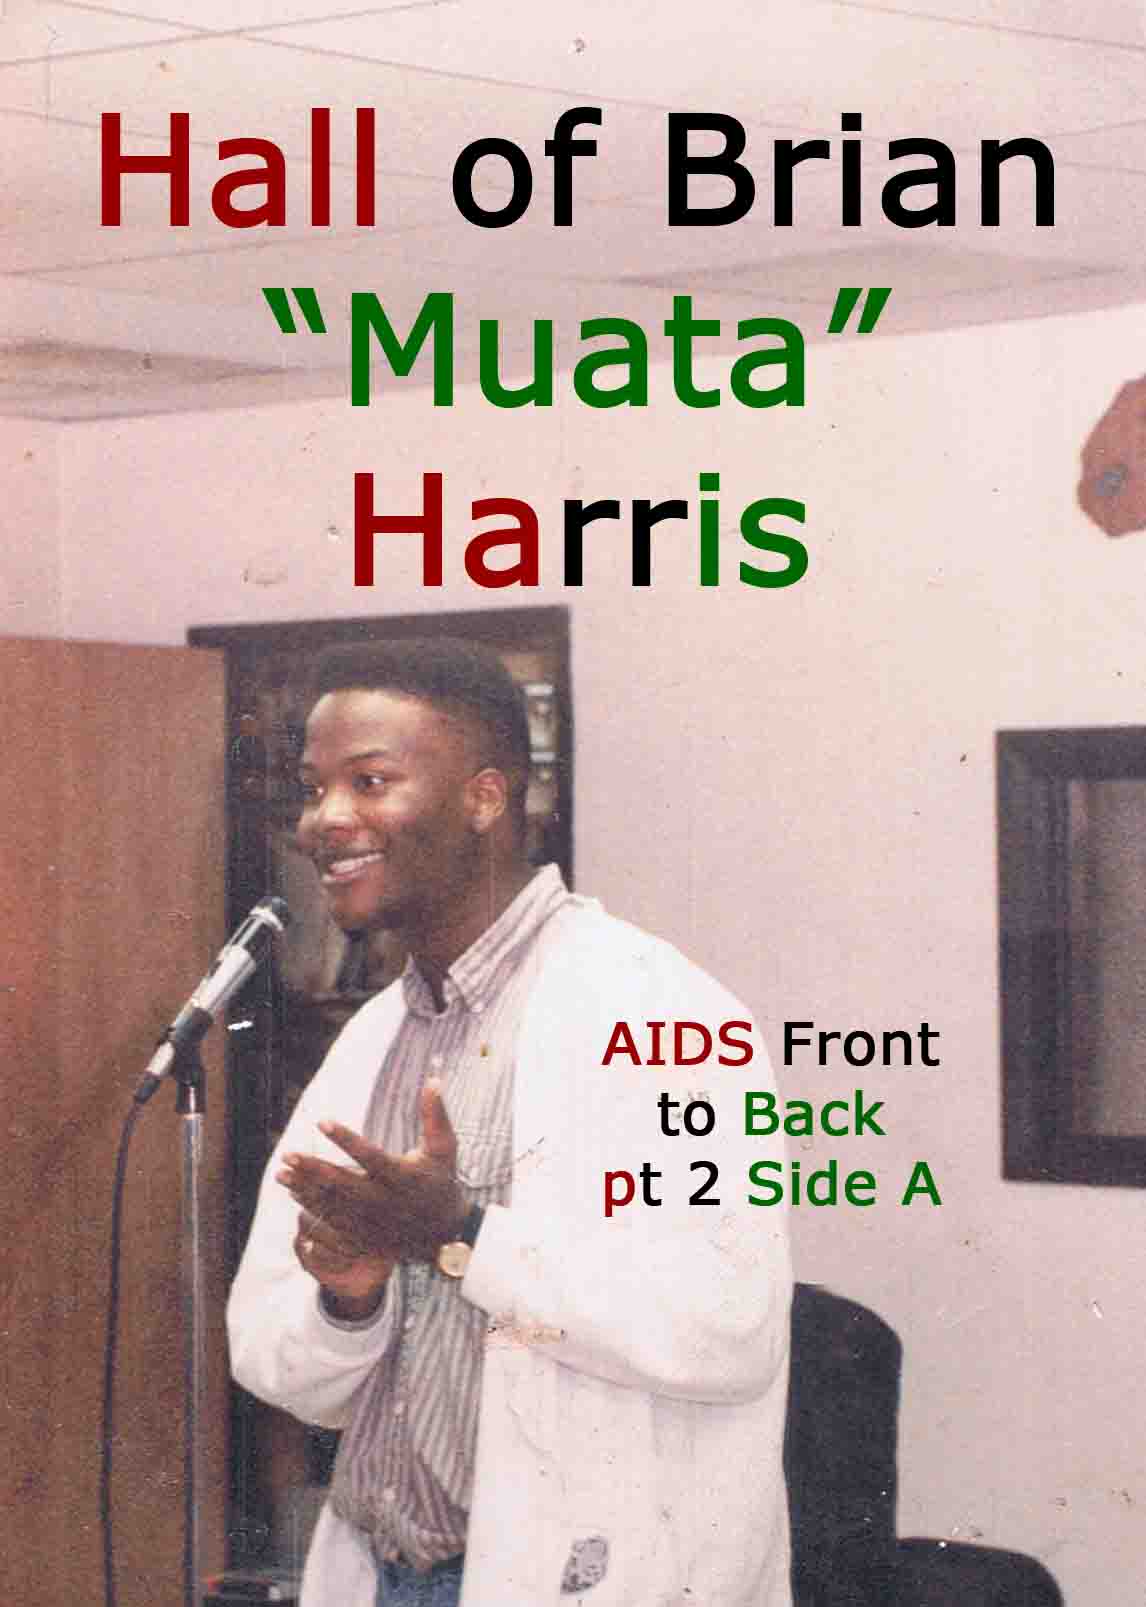 AIDS front to back pt 2 side A